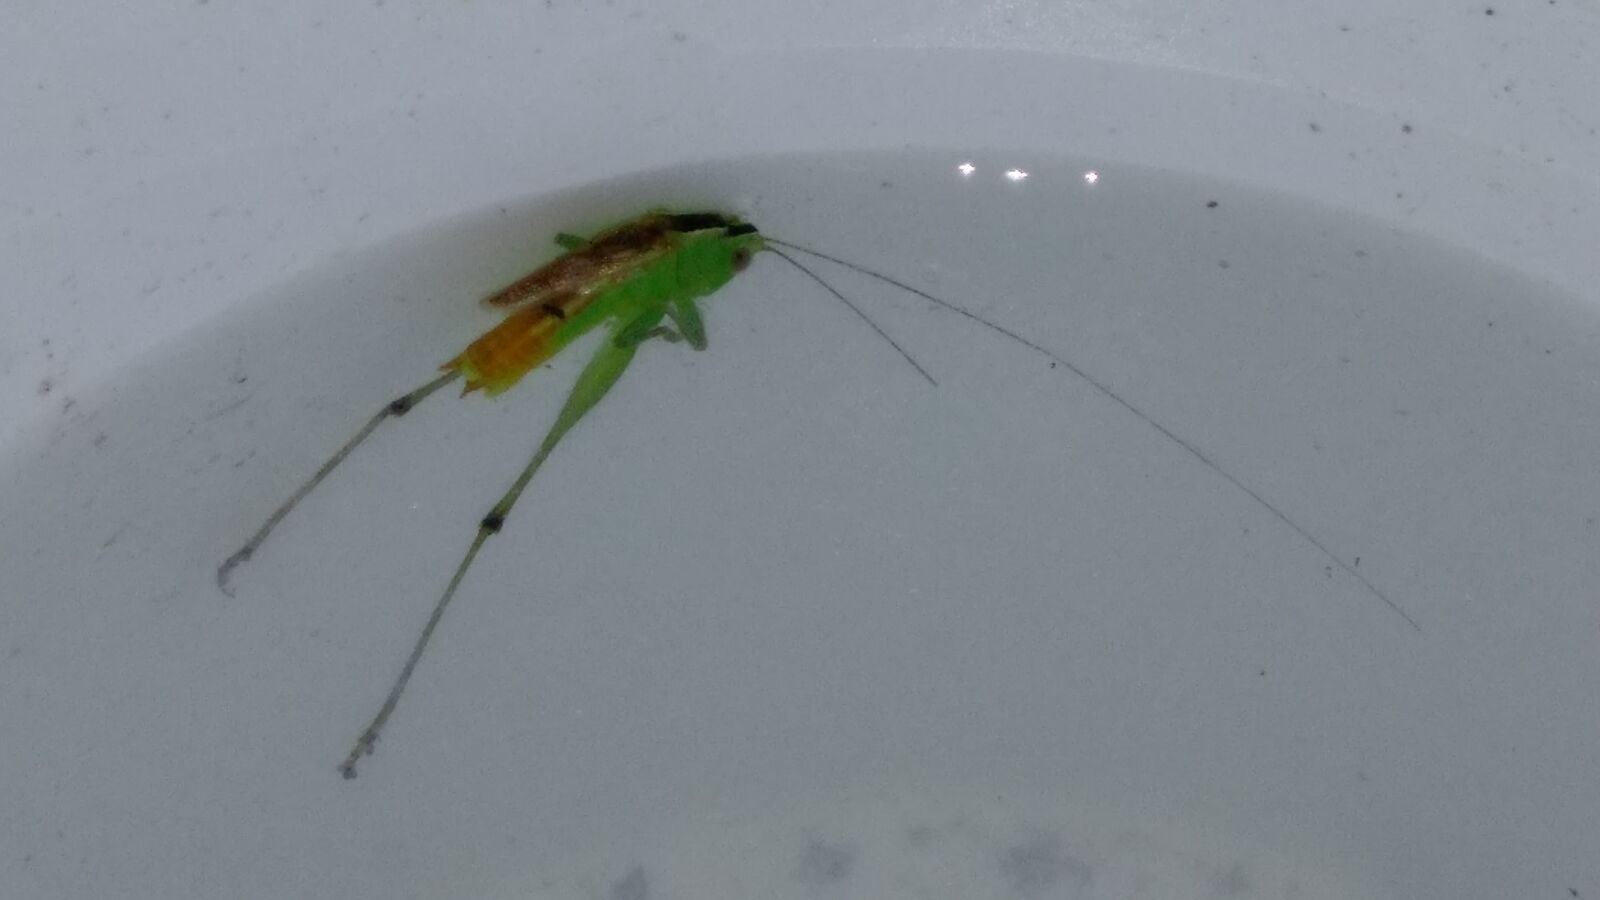 HTC ONE A9 sample photo. Bug, cricket, dead, drown photography